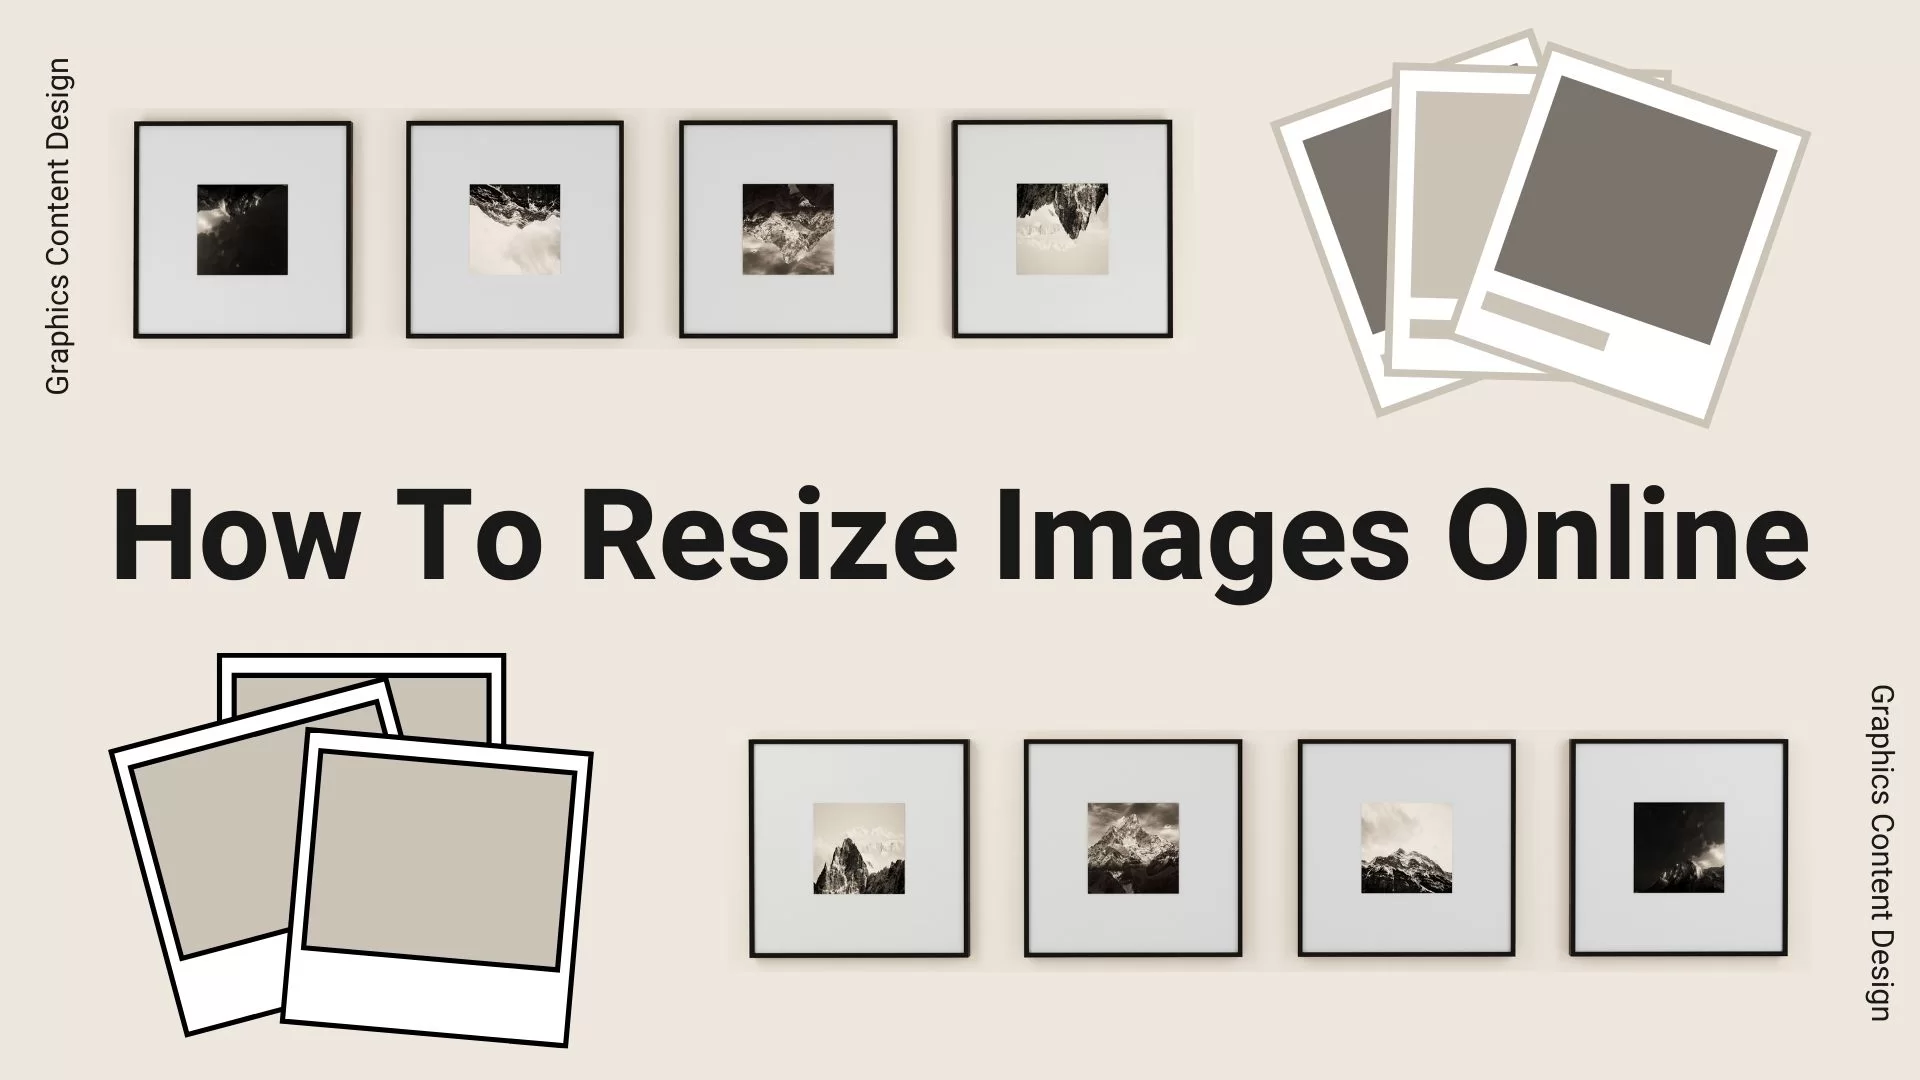 Why Resize Images Online?